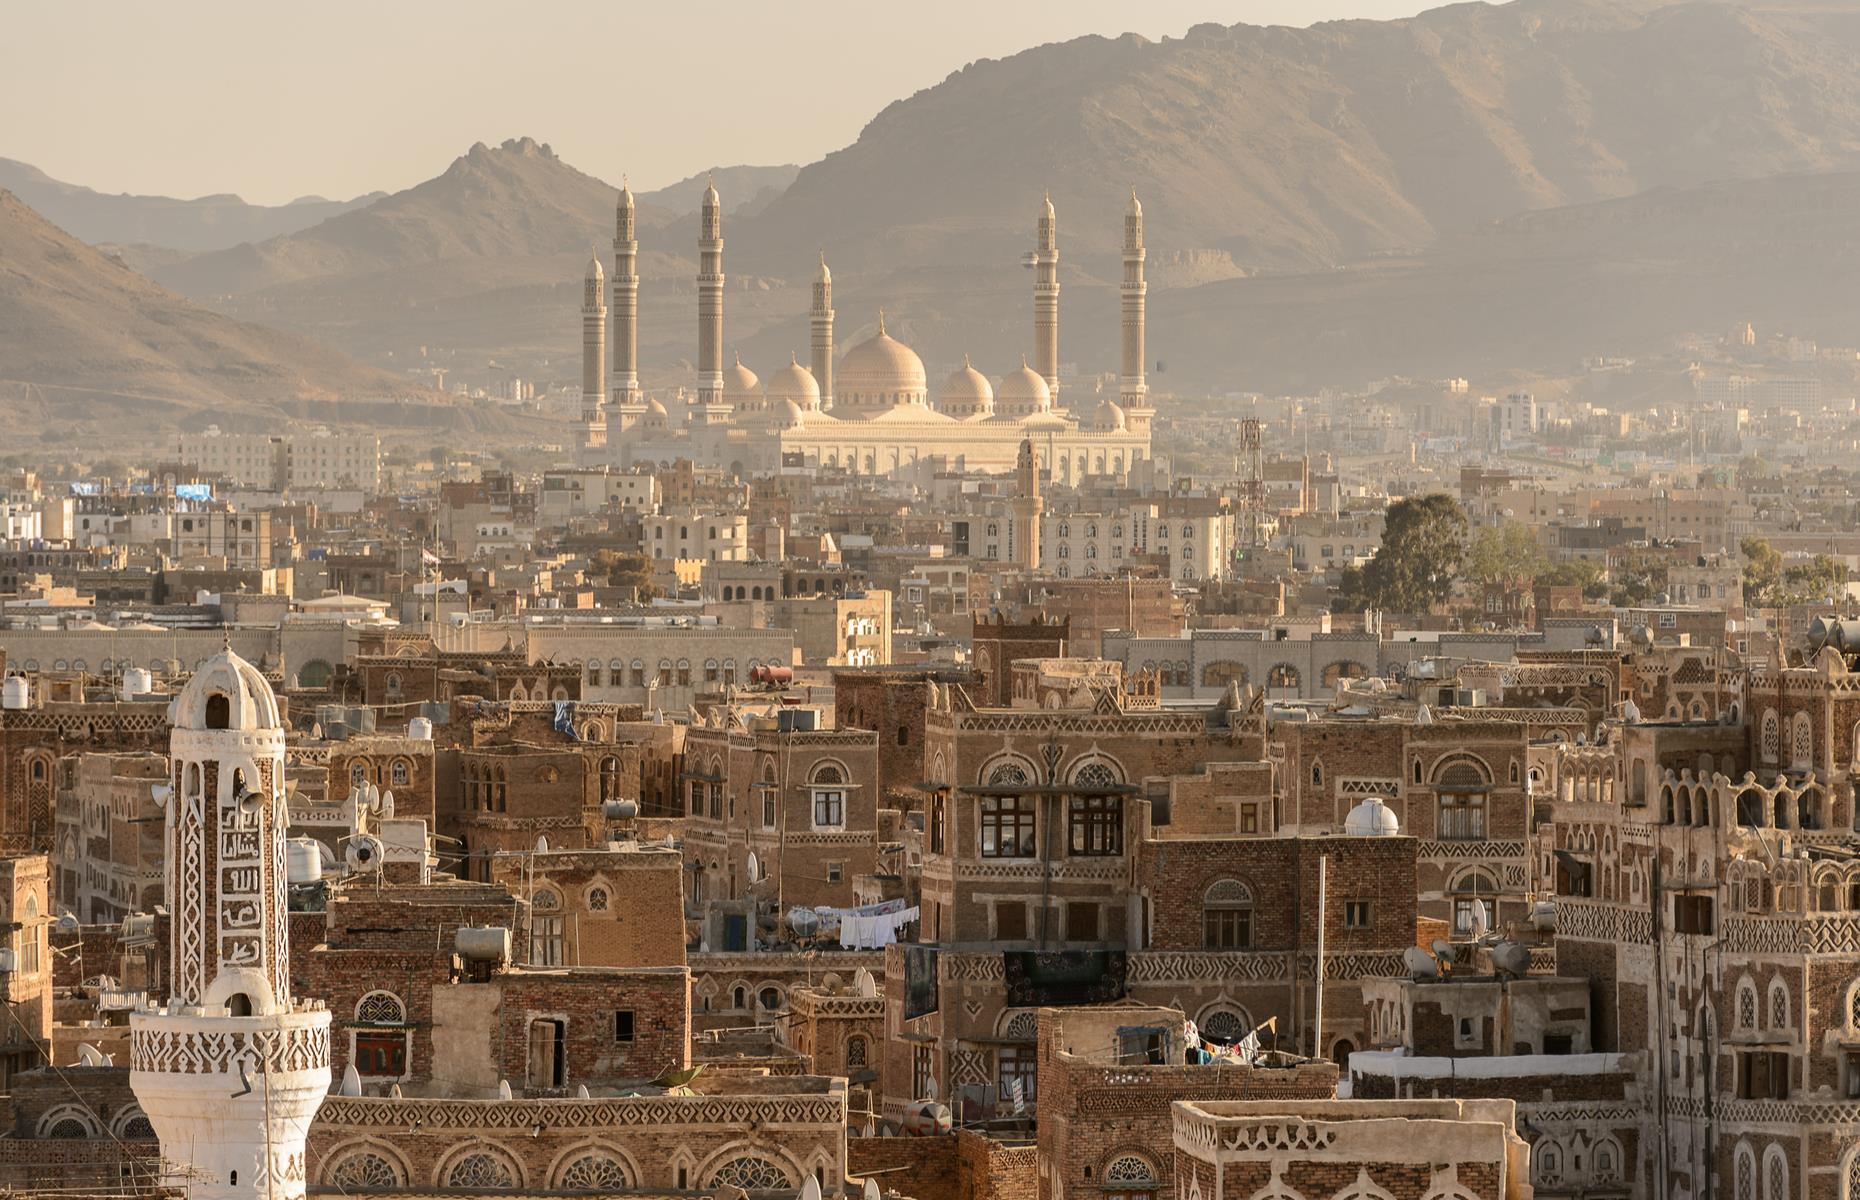 <p>Although the civil war has devastated the country’s resources, Yemen is home to four UNESCO World Heritage Sites including the Old City of its capital, Sana’a (pictured). Sana'a has been inhabited for 2,500 years, making it one of the oldest cities on Earth. Due to the danger of terror attacks and kidnapping, the UK Foreign Office currently advises against all travel to Yemen. </p>